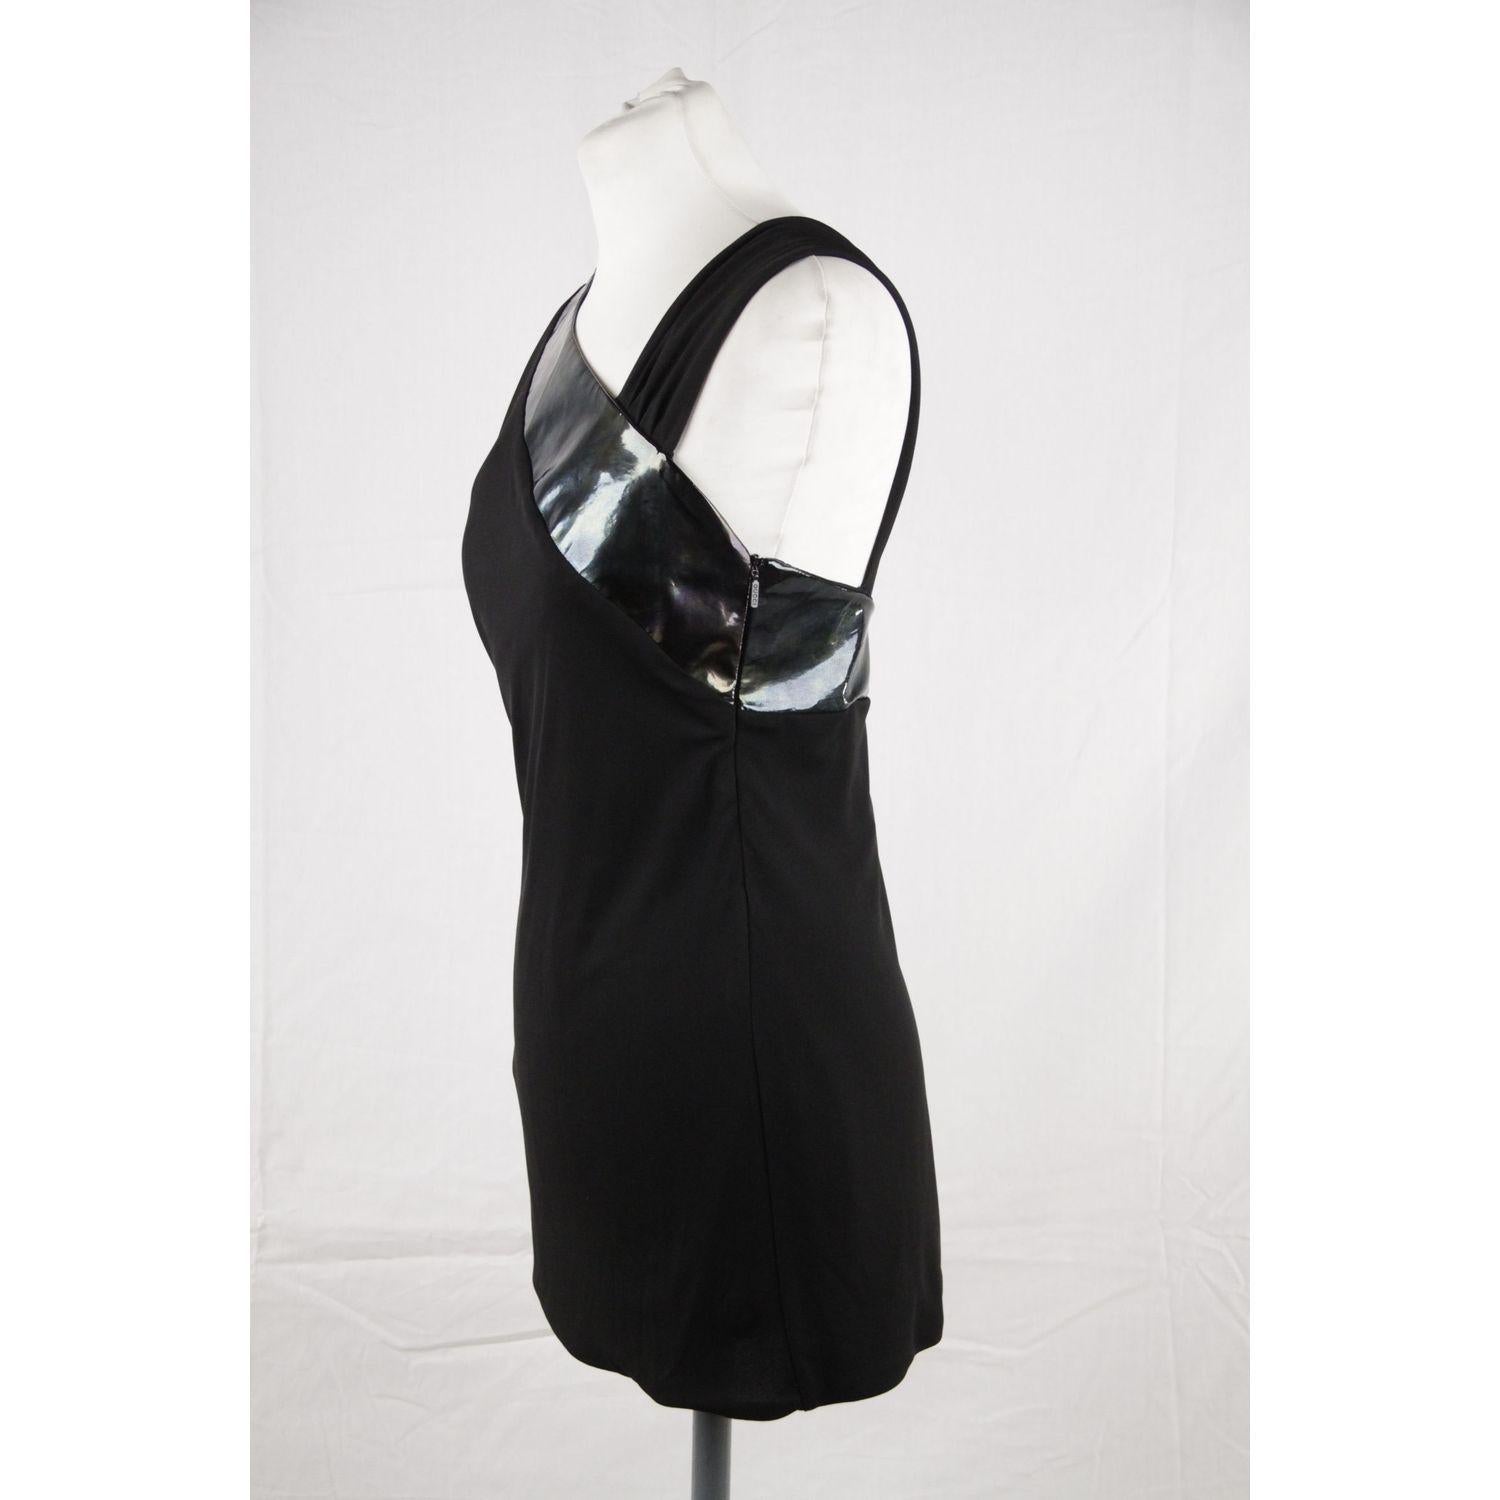 MATERIAL: Viscose COLOR: Black MODEL: Asymmetric Top GENDER: Women SIZE: 42 IT COUNTRY OF MANUFACTURE: Italy Condition CONDITION DETAILS: B :GOOD CONDITION - Some light wear of use - minimal wear on patent leather trim Measurements MEASUREMENTS: